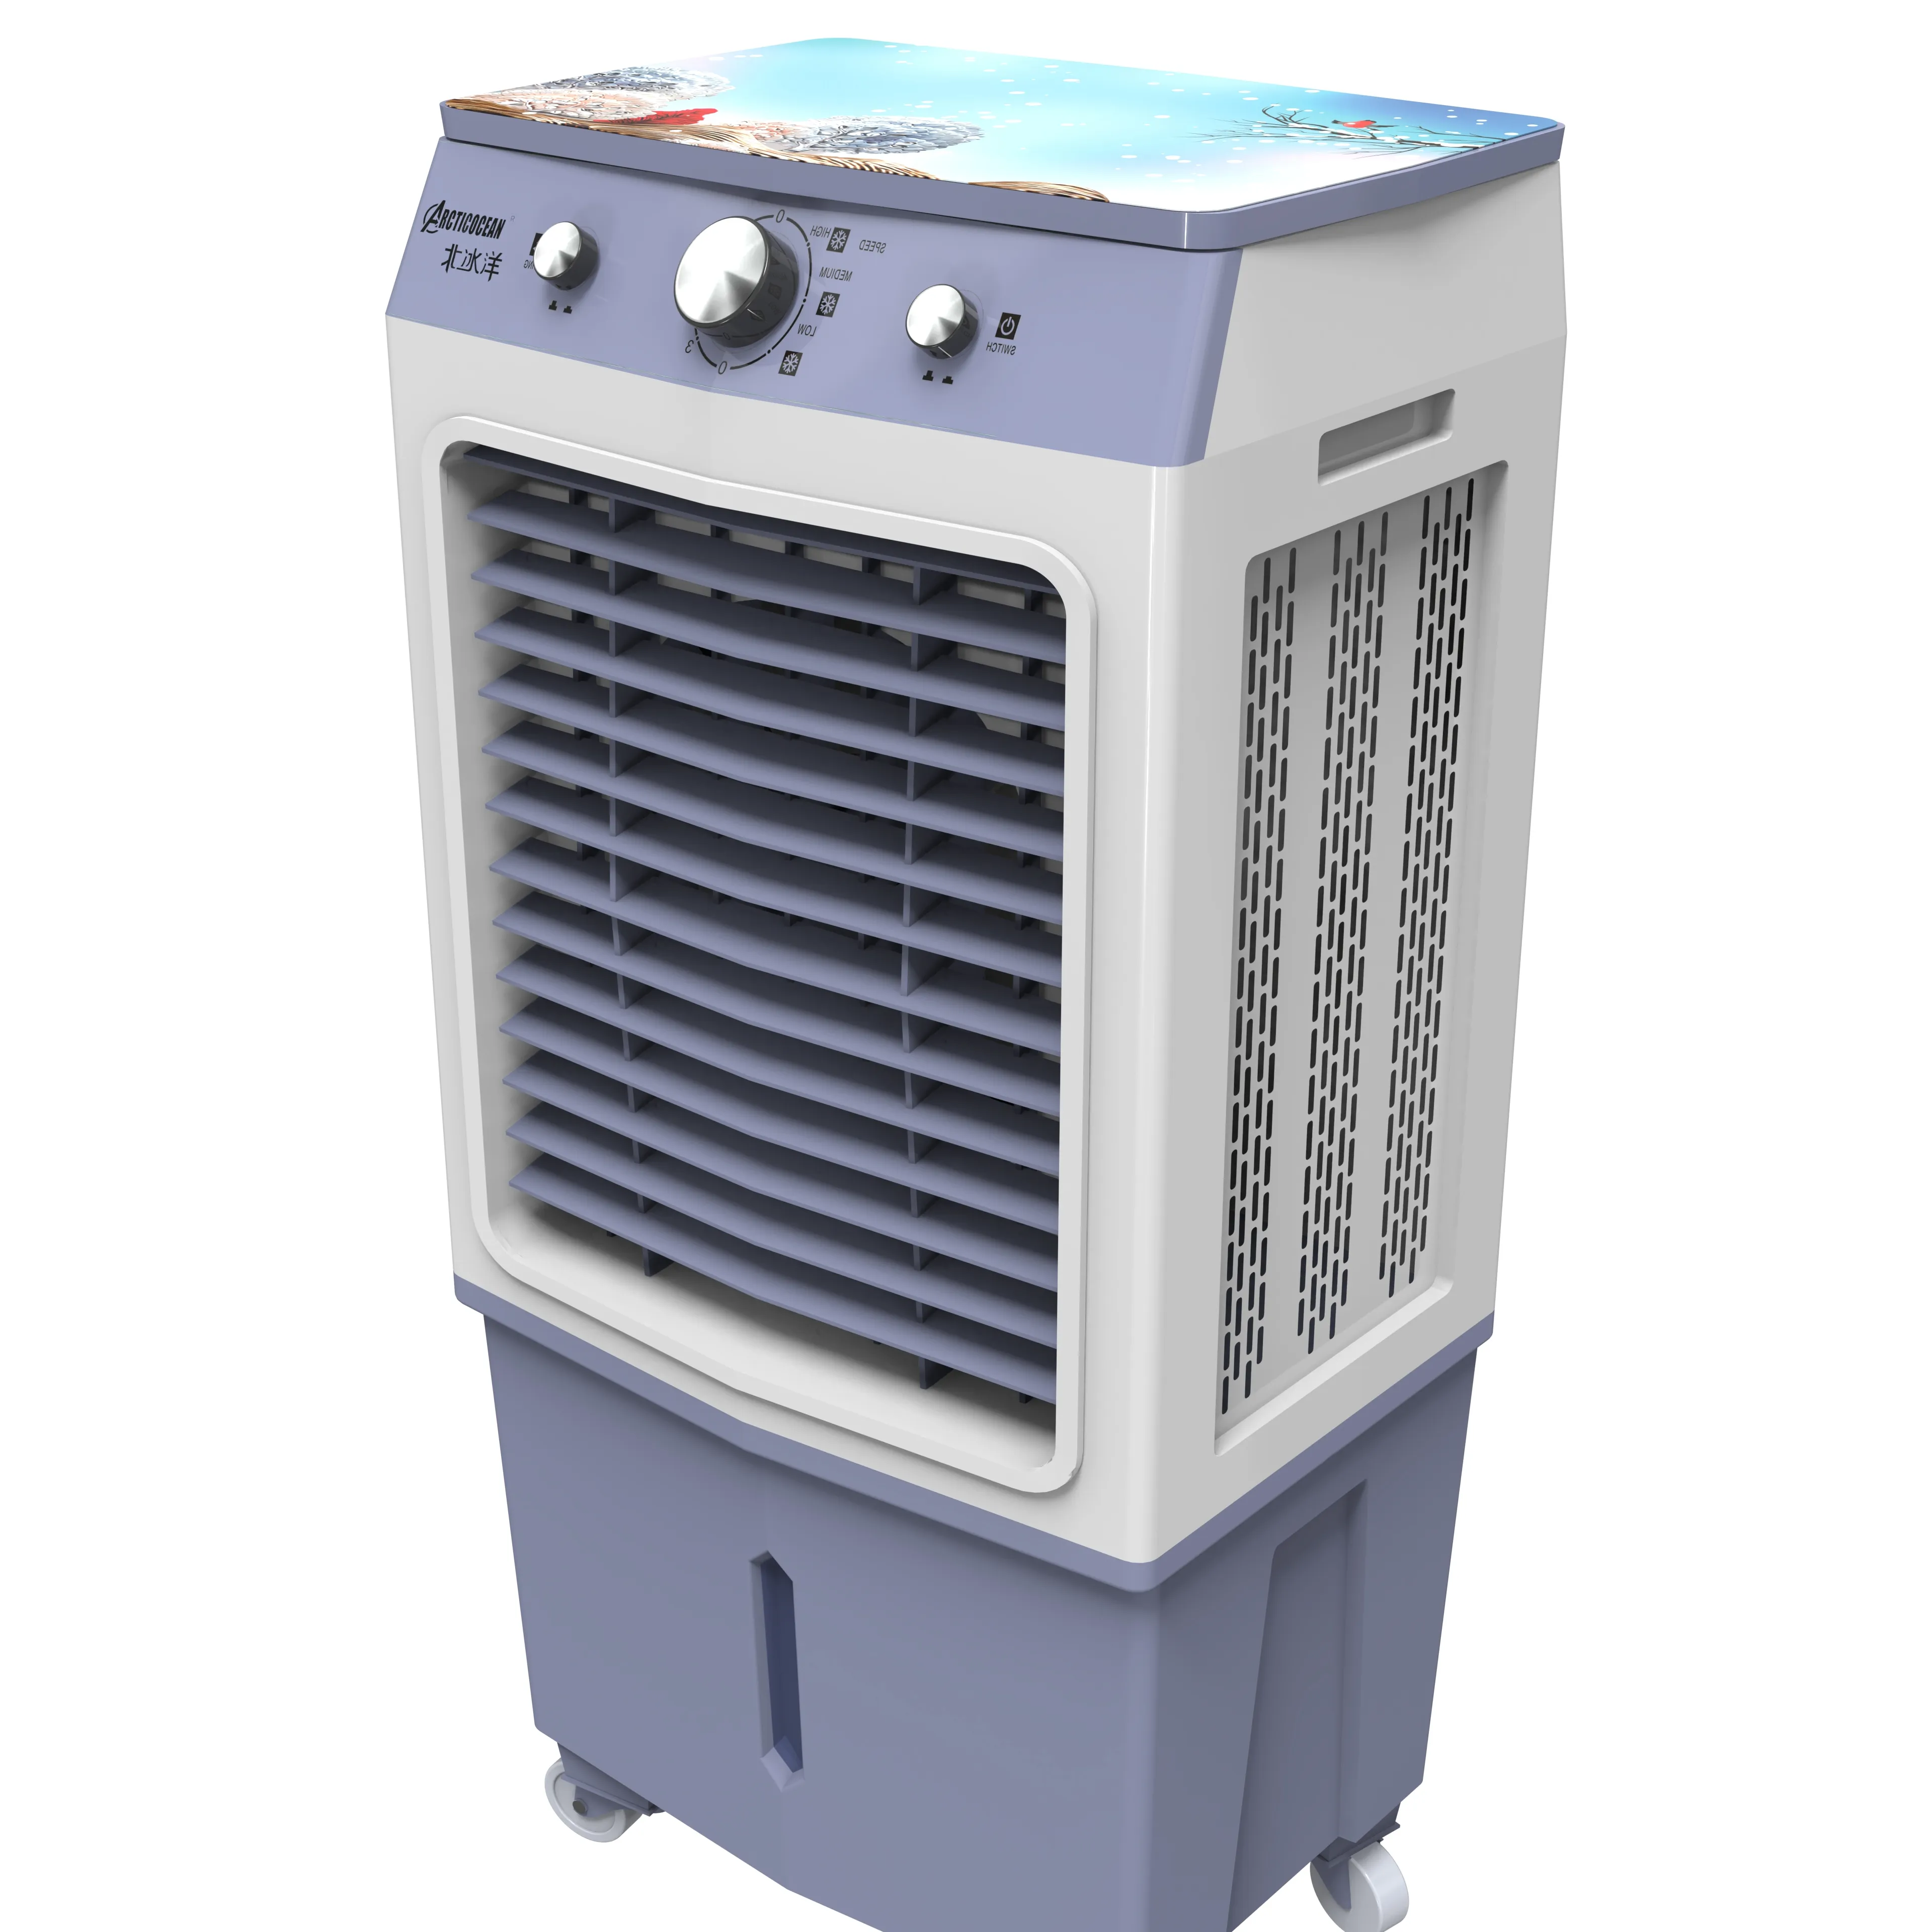 Competitive Price Water Cooled Floor Standing Aircon Portable Air Cooler Conditioner Household Air Conditioning Mechanical